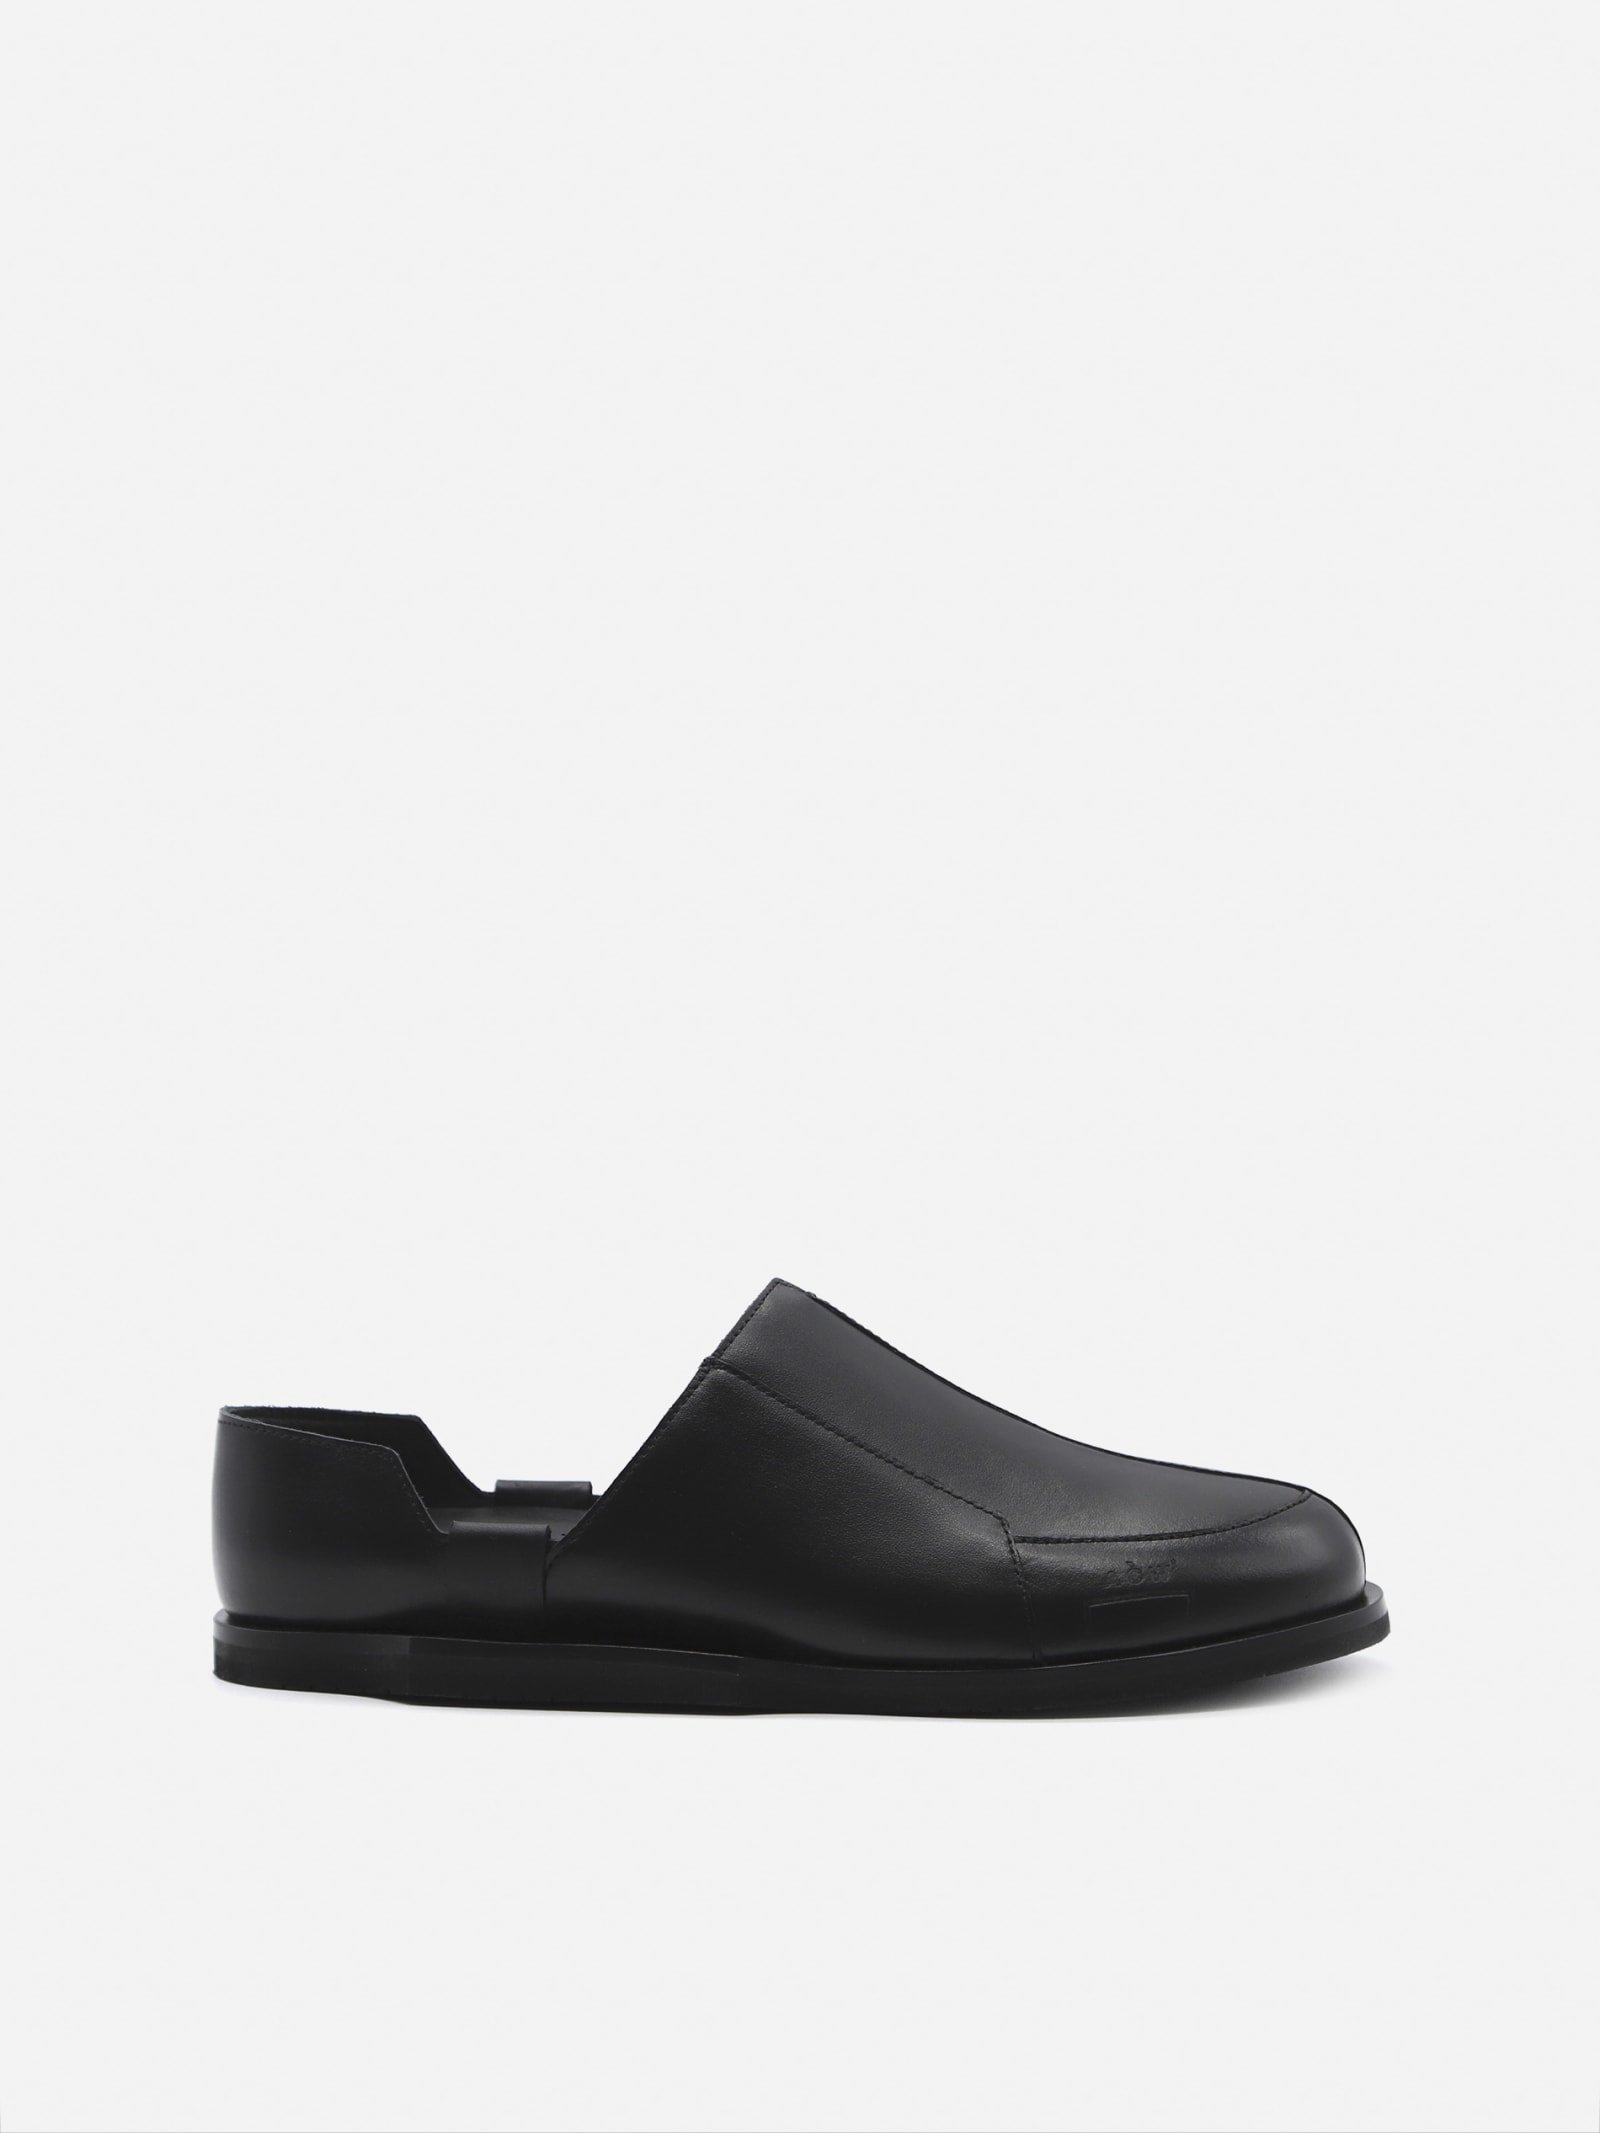 A-COLD-WALL Leather Slip-on Loafers With Cut-out